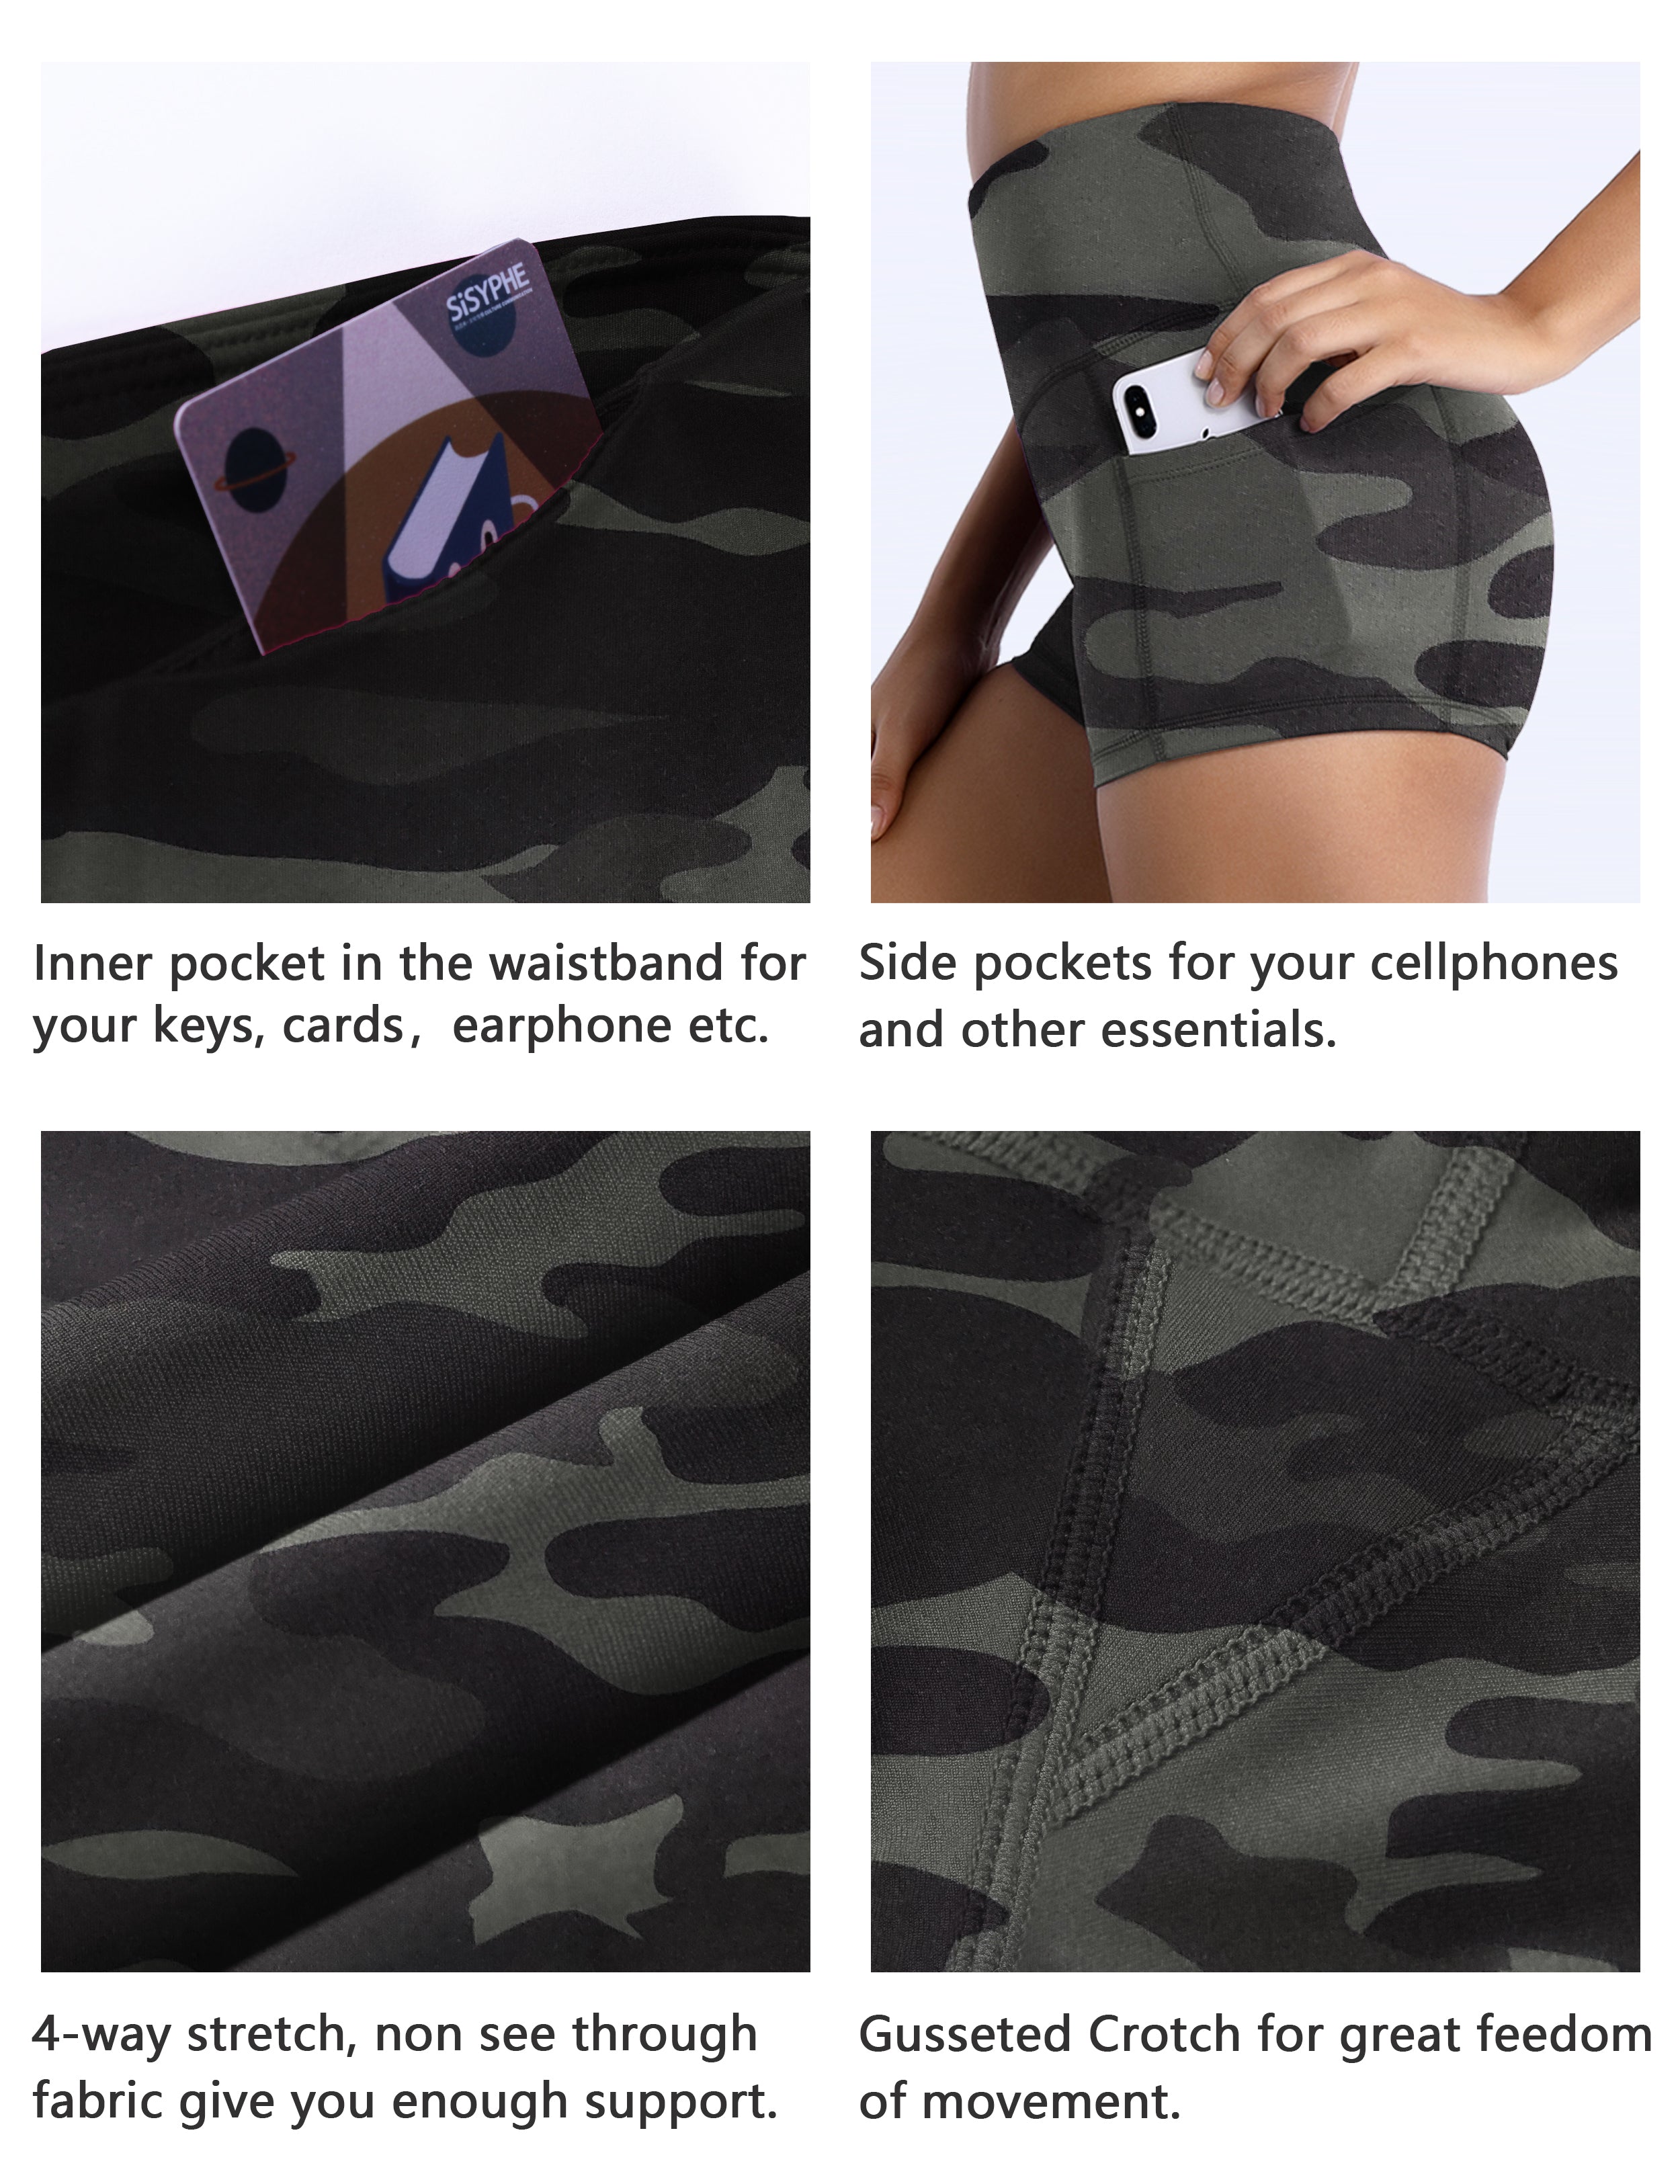 2.5" Printed Side Pockets Golf Shorts dimgraycamo Sleek, soft, smooth and totally comfortable: our newest sexy style is here. Softest-ever fabric High elasticity High density 4-way stretch Fabric doesn't attract lint easily No see-through Moisture-wicking Machine wash 78% Polyester, 22% Spandex